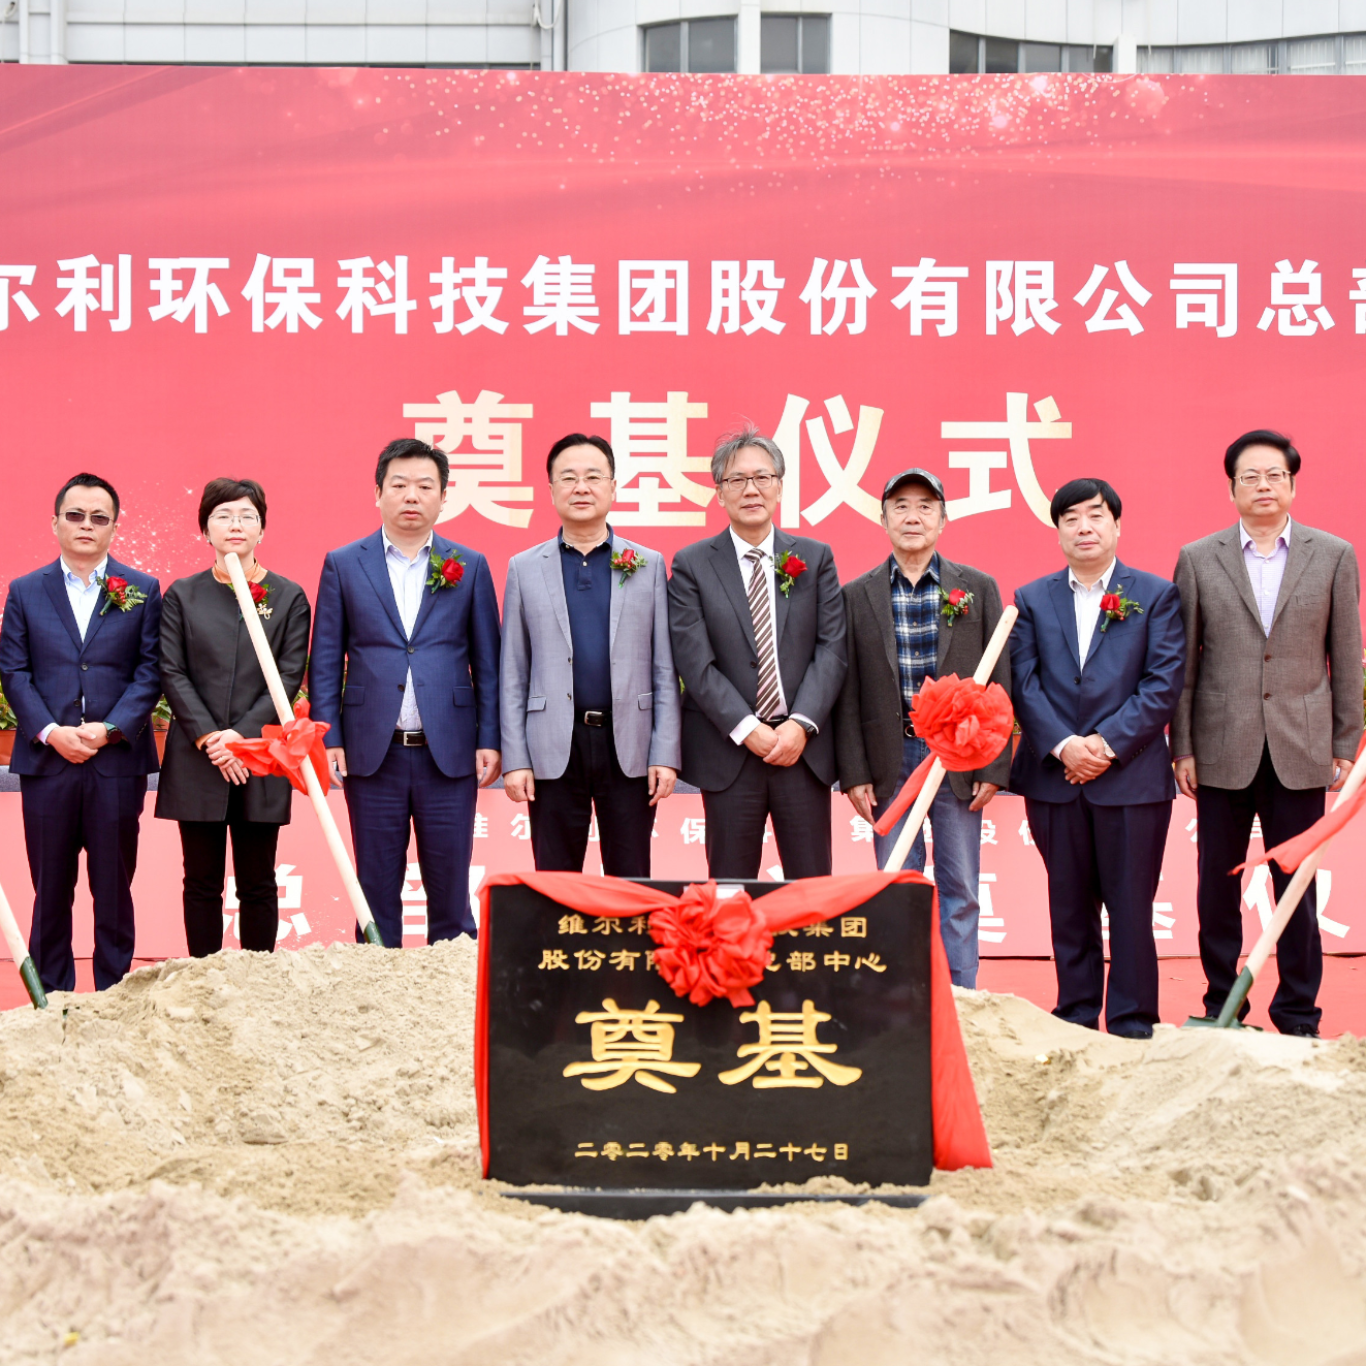 WELLE Group Lays Foundation Stone for New Headquarter Center